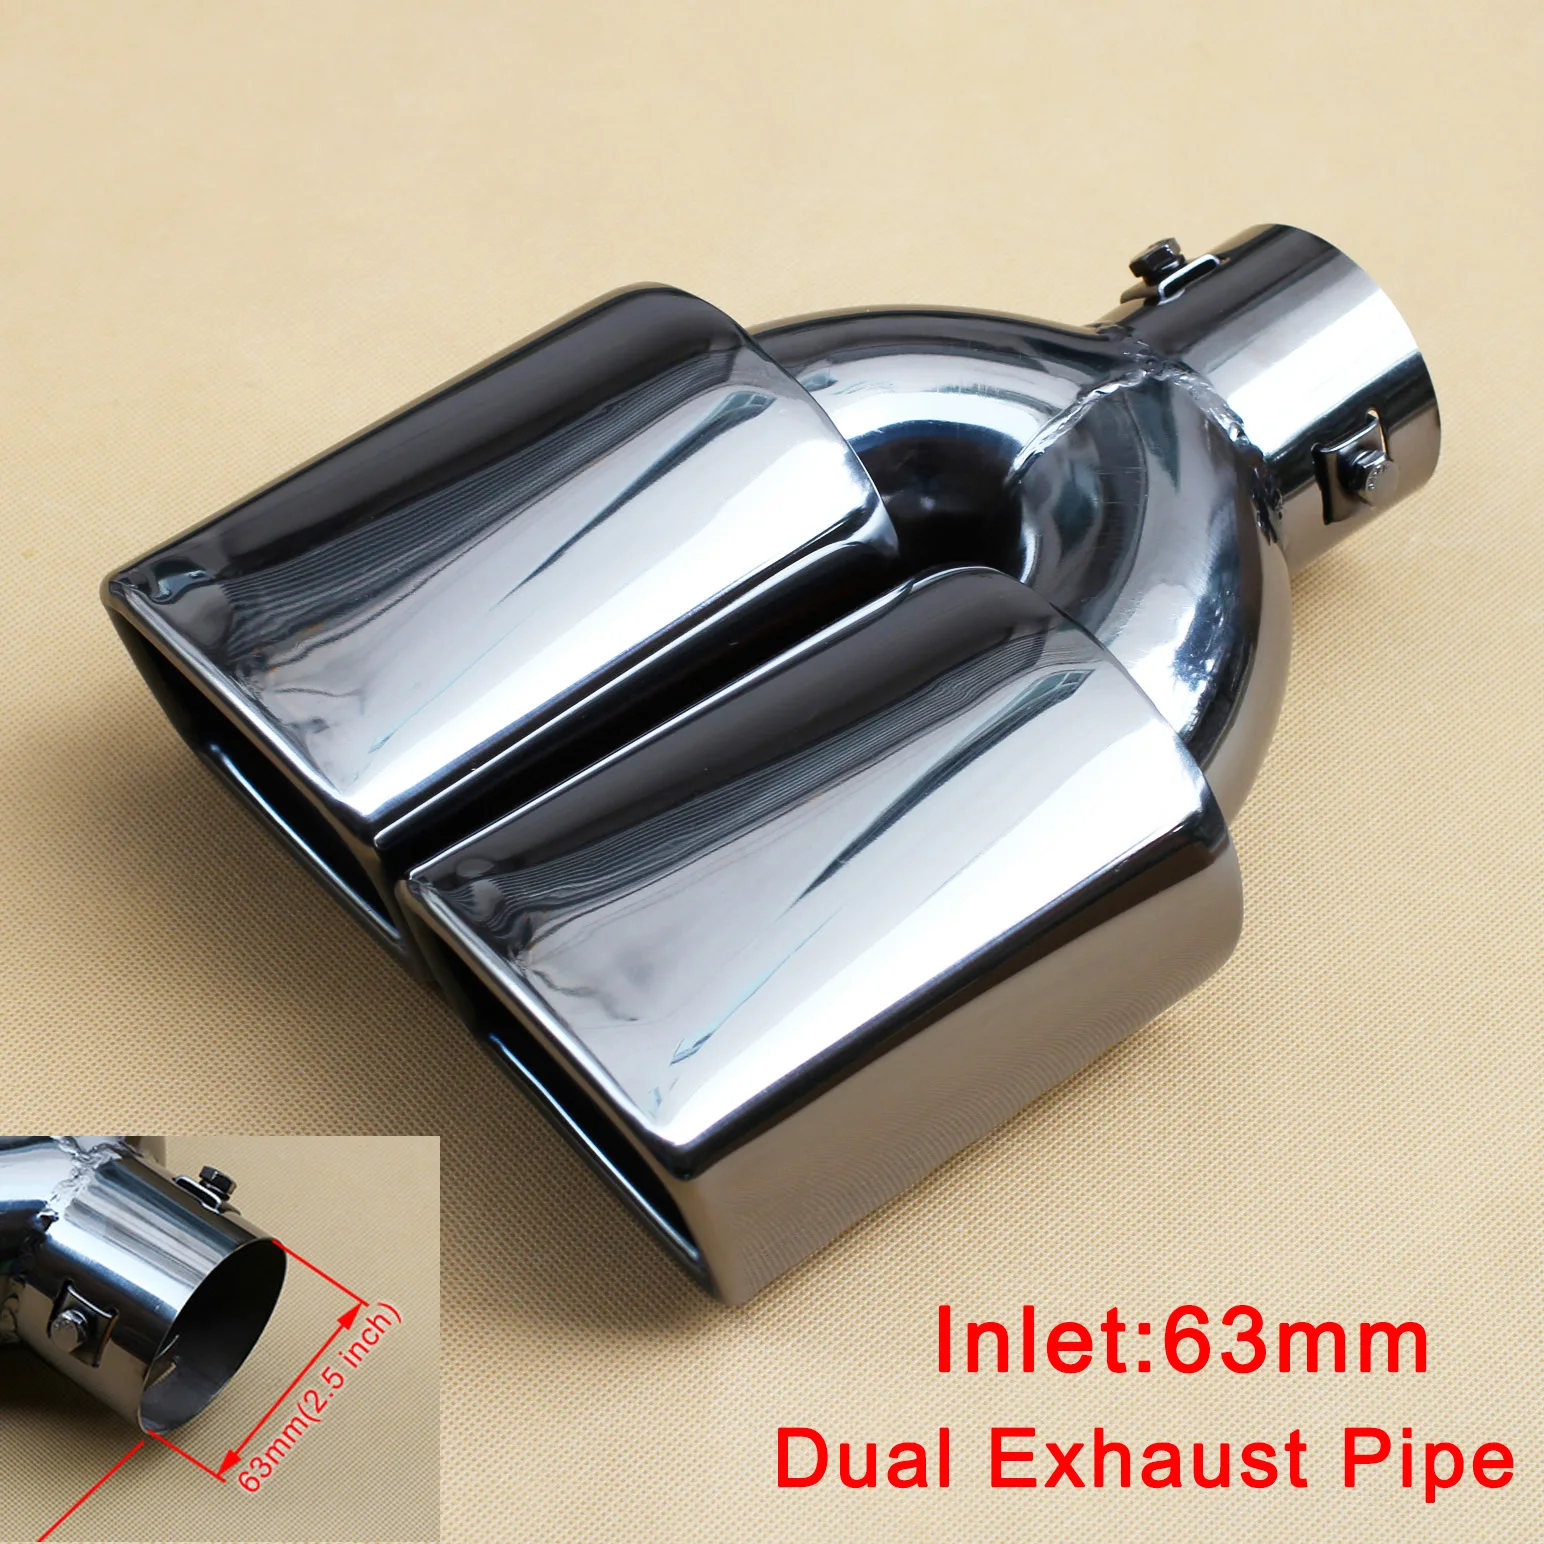 Universal Car Tailpipe 63mm 2.5 inch Diameter Tail Muffler Rear Exhaust Silencer Pipe Tip Dual Outlet Cover Stainless Steel